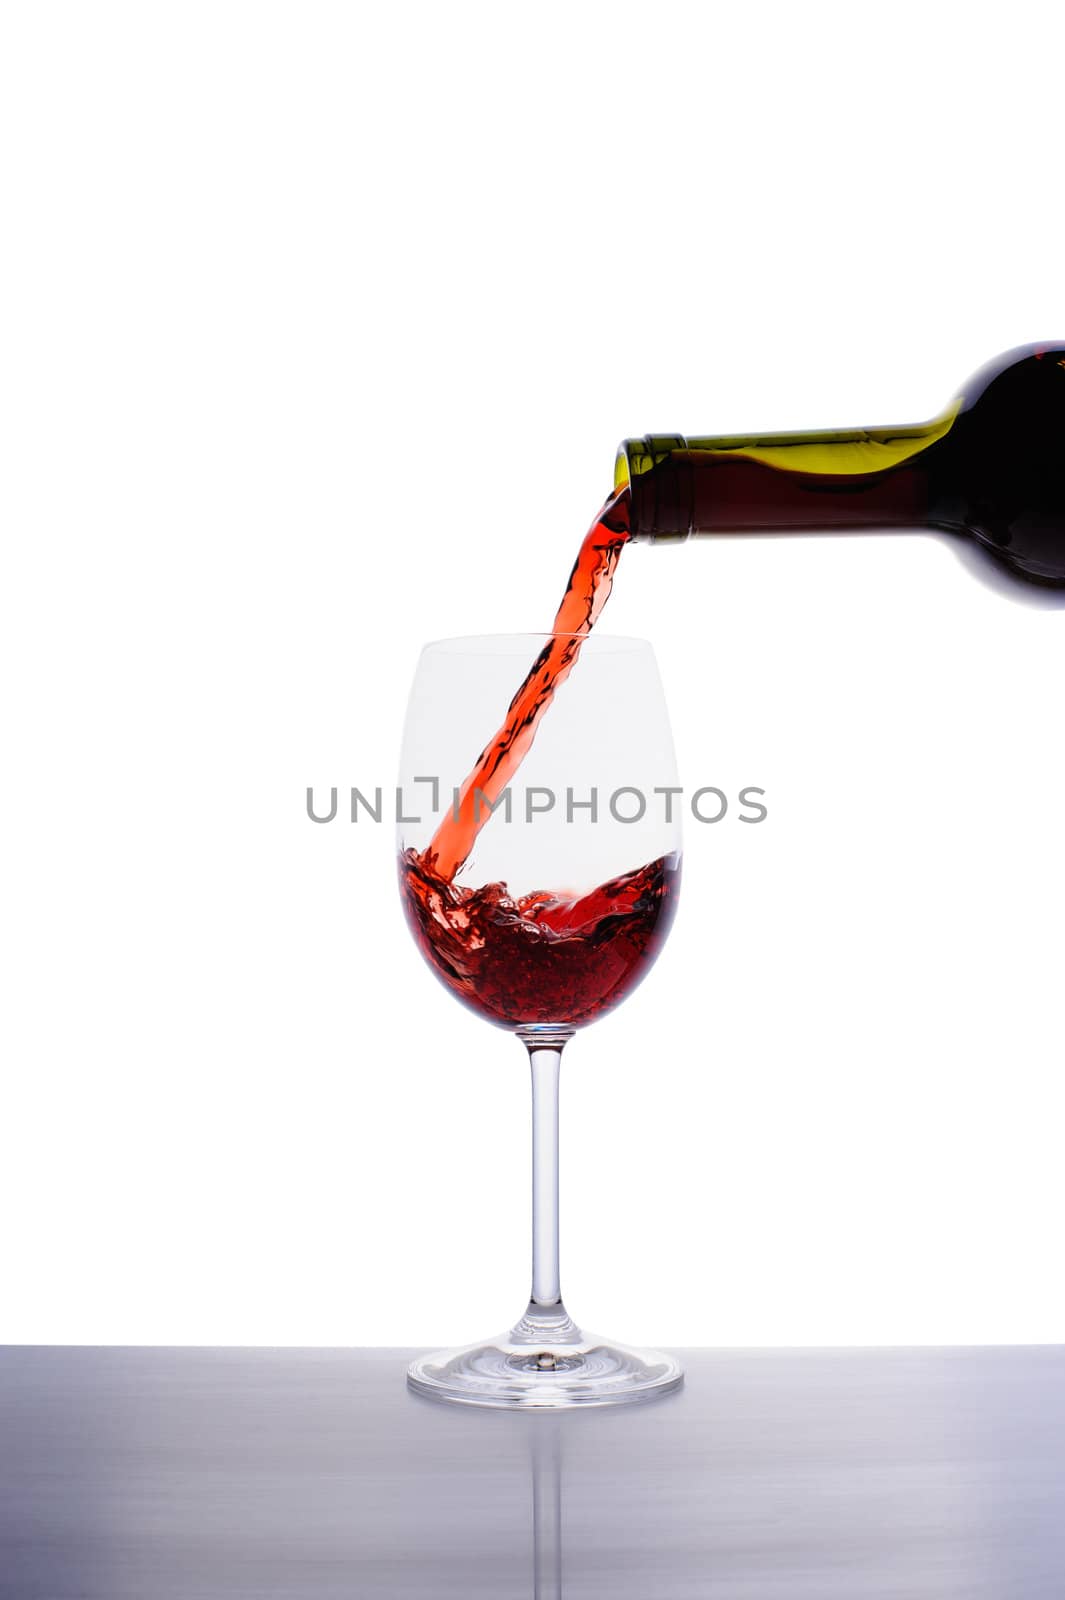 Red wine pouring into wine glass by nvelichko